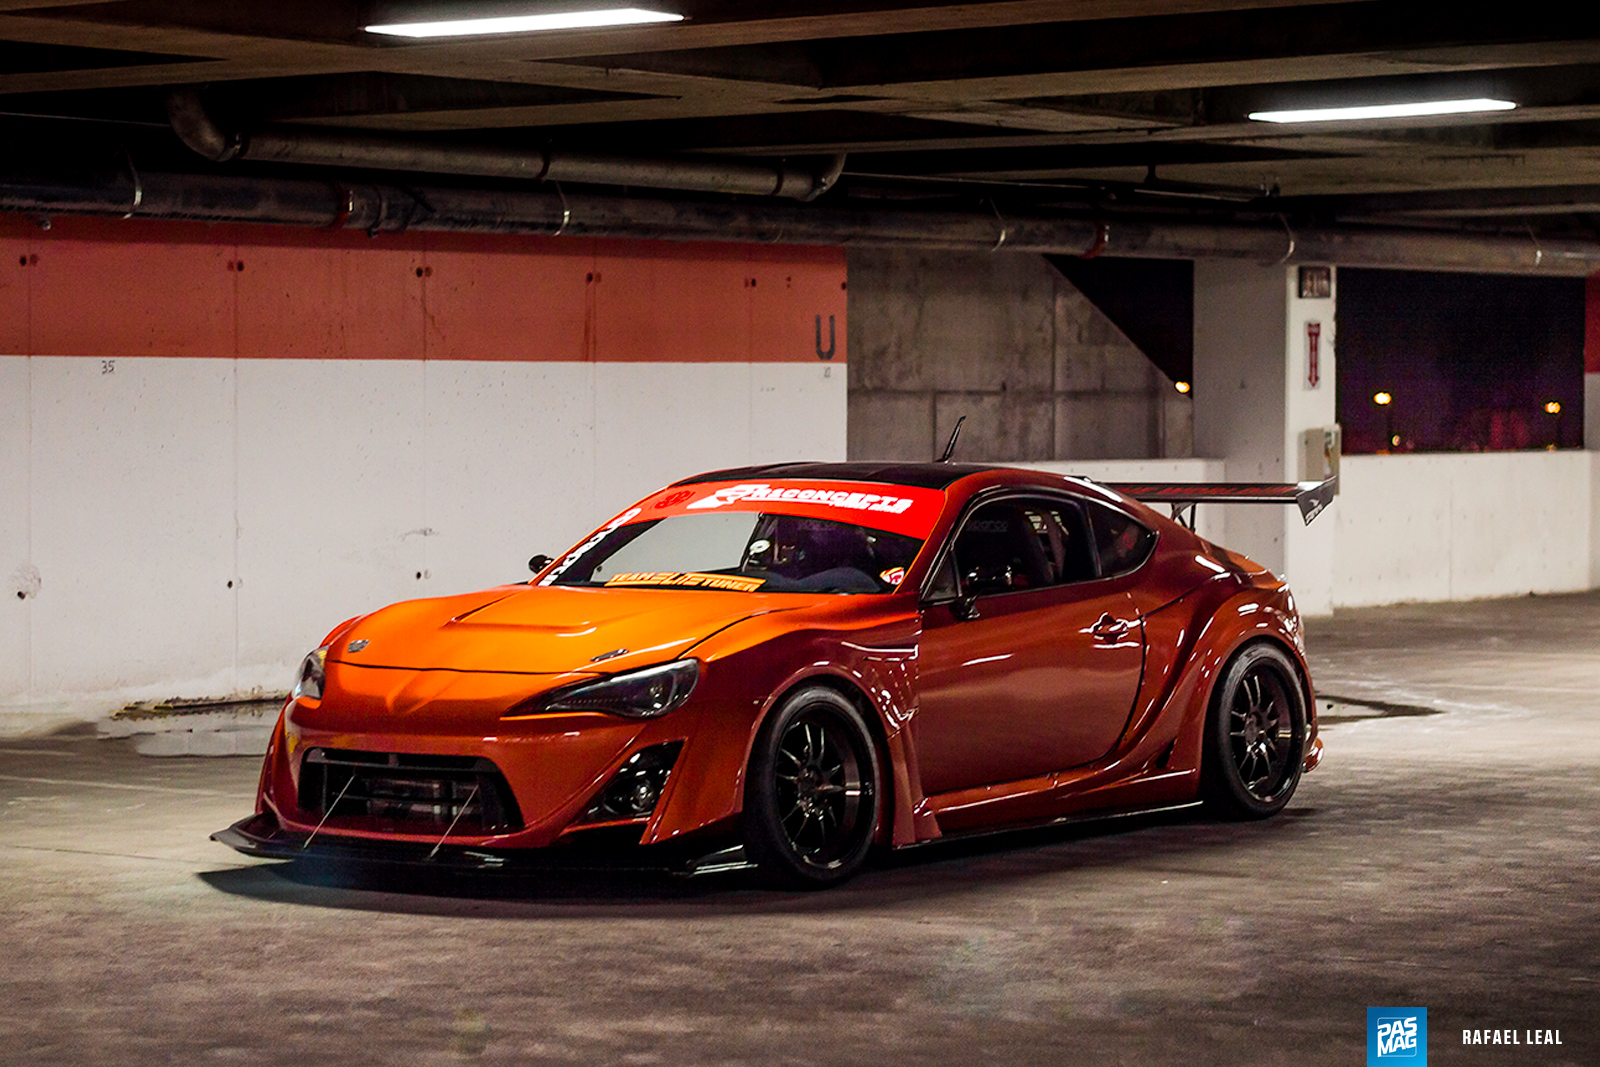 08 Rafael Leal 2013 Scion FRS pasmag builds to follow